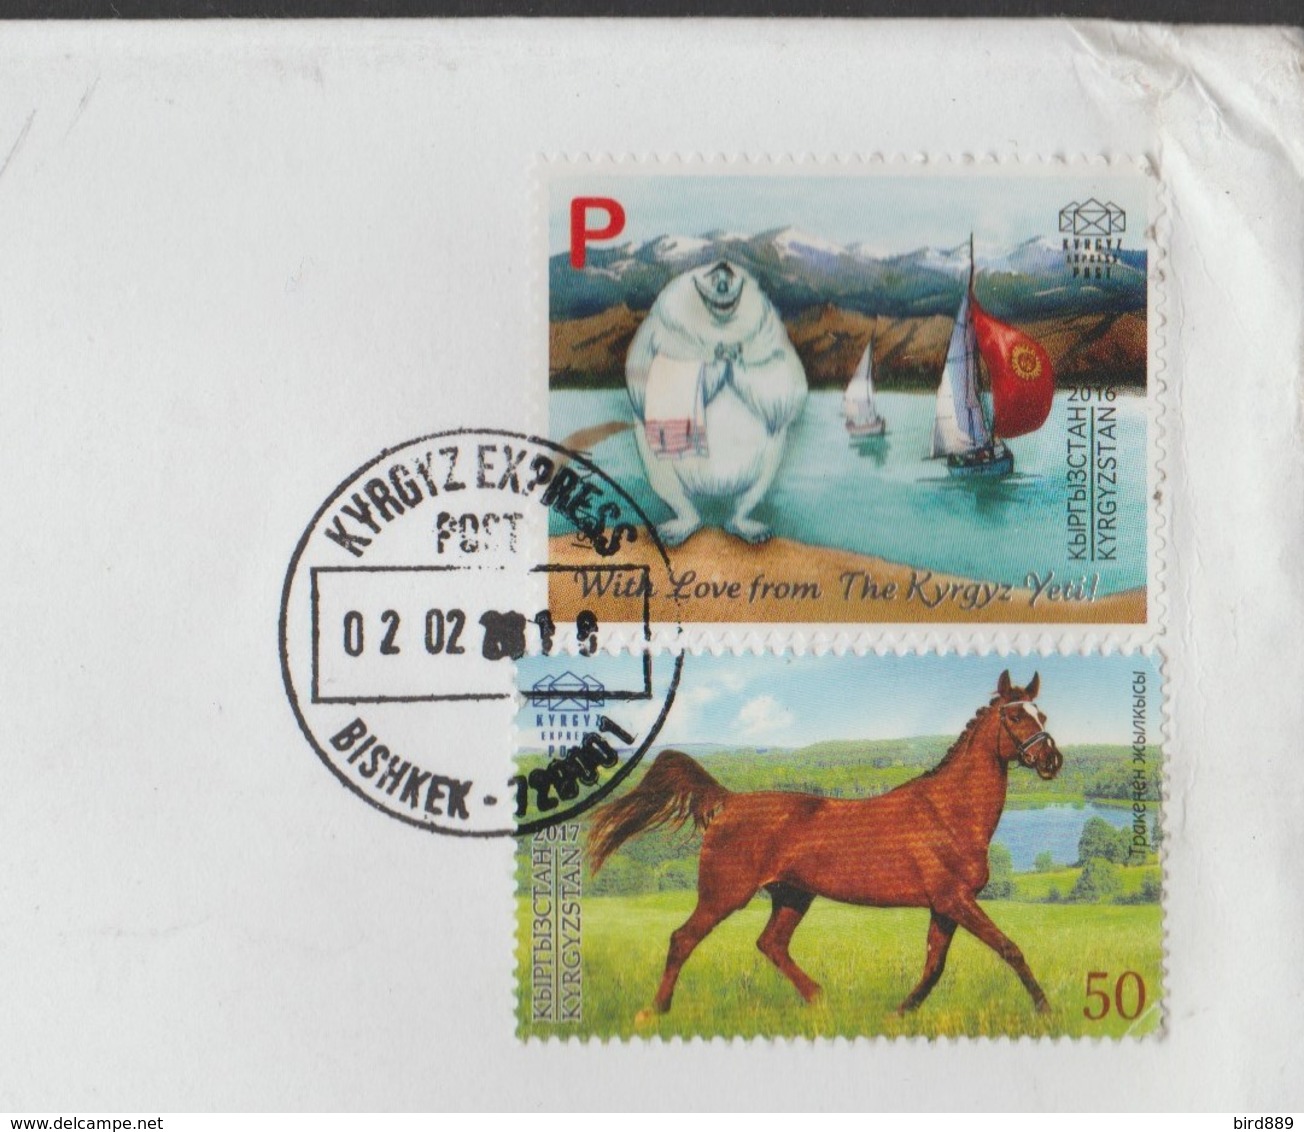 Kyrgyzstan Express Post Kyrgyz Yeti And Horse  2 Stamps Used - Kirghizistan